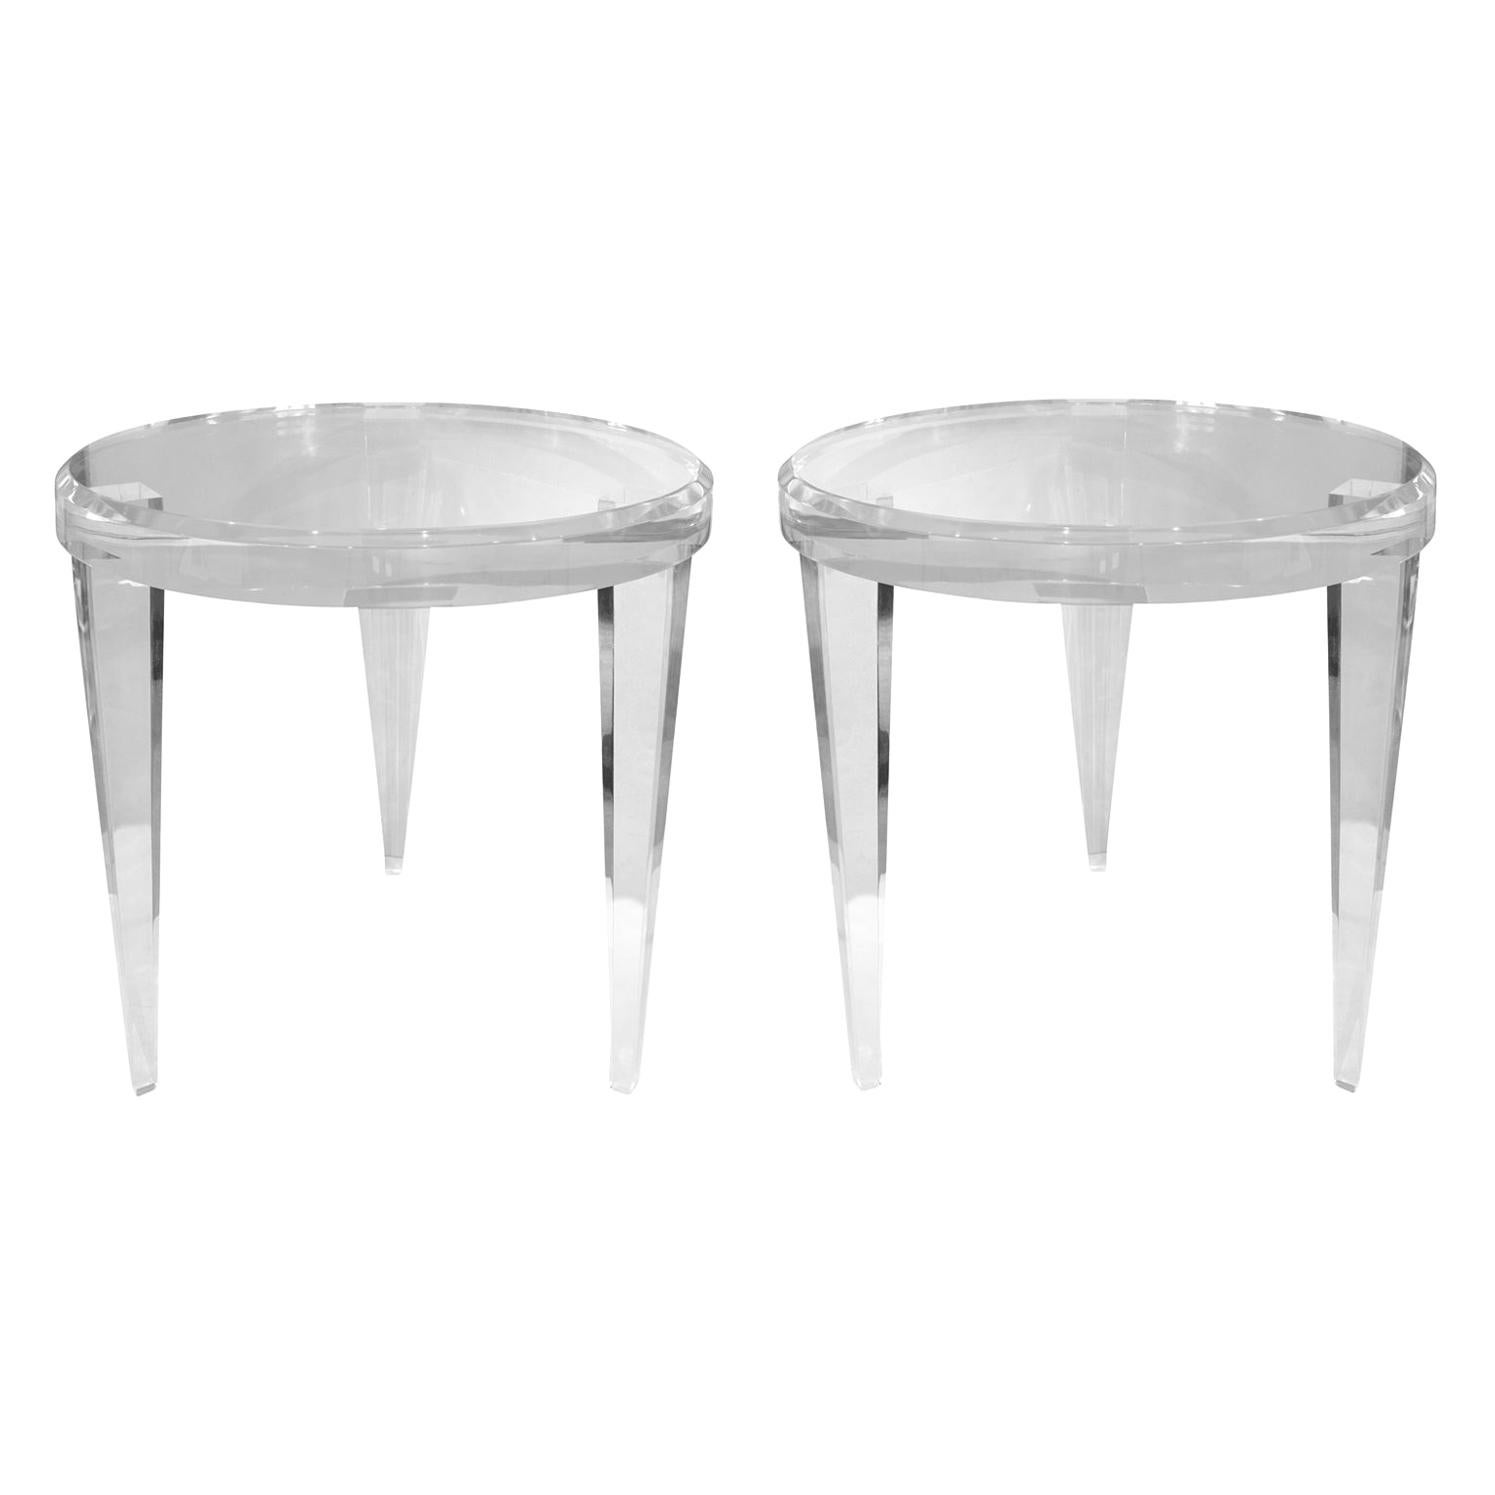 Pair of Sculptural Round End Tables in Solid Lucite, 1990s For Sale